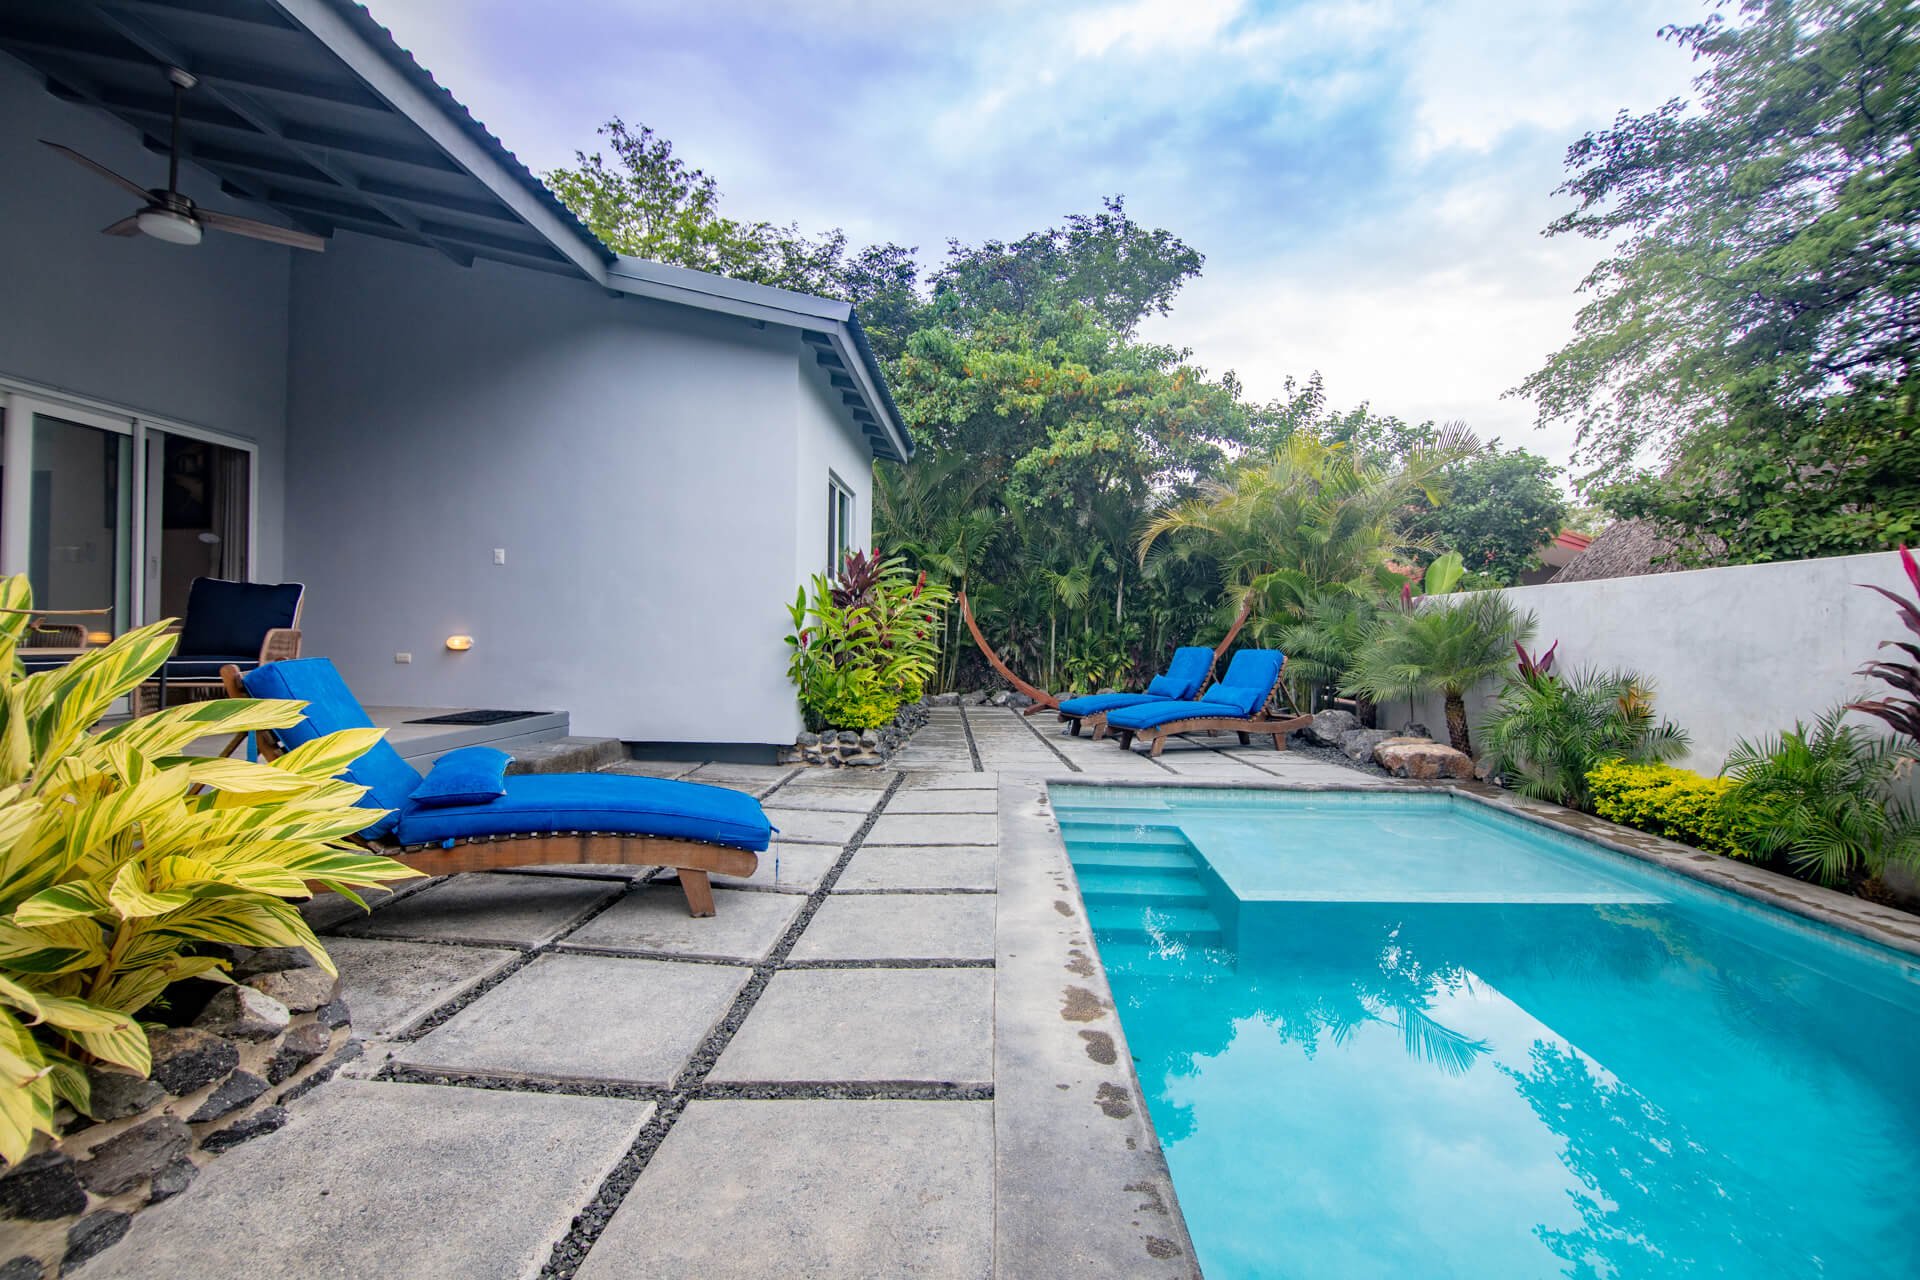 Private Pool at Casita U22: Your own oasis in Nicaragua